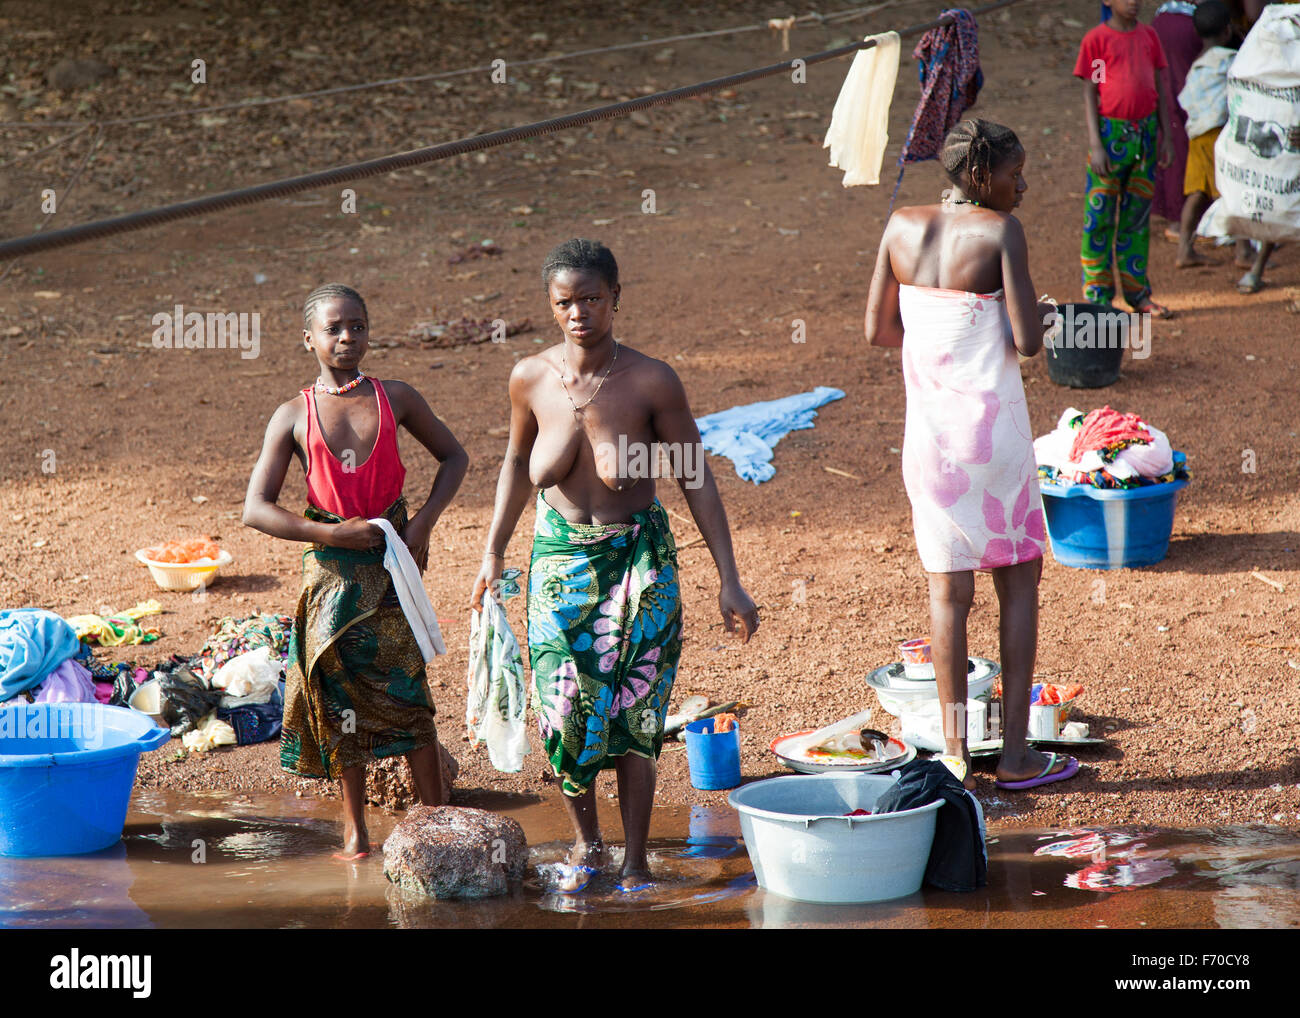 African Women Taking Bath And Washing Clothes By The River In Rural